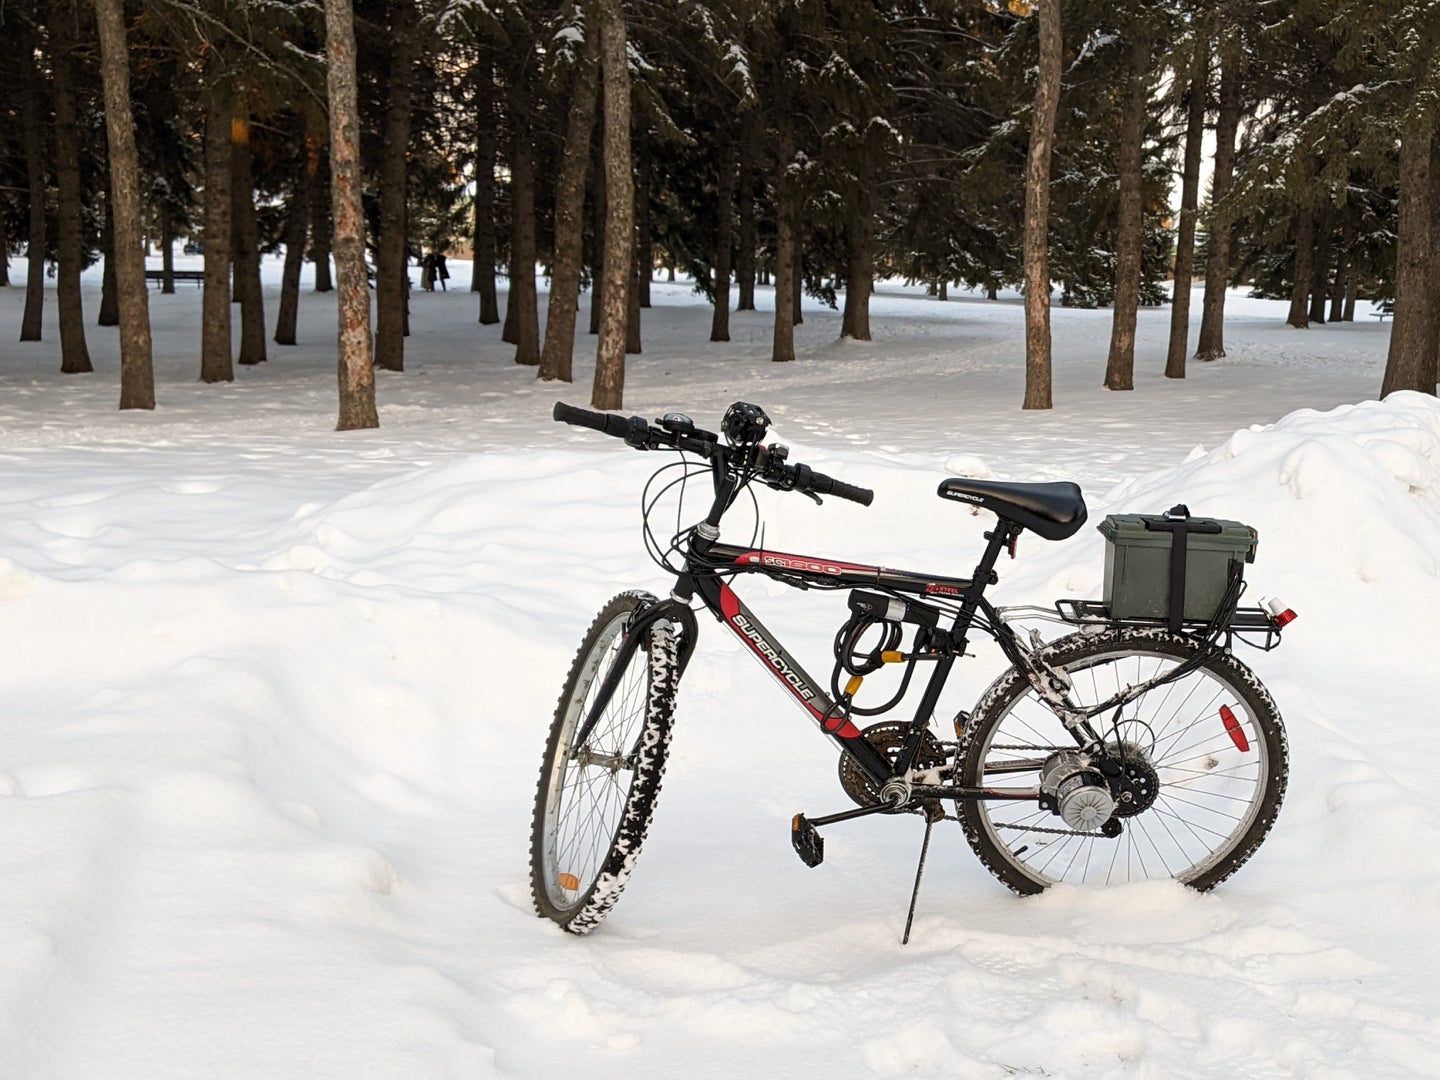 A homemade DIY e-bike parked in front of a snow-covered evergreen grove.